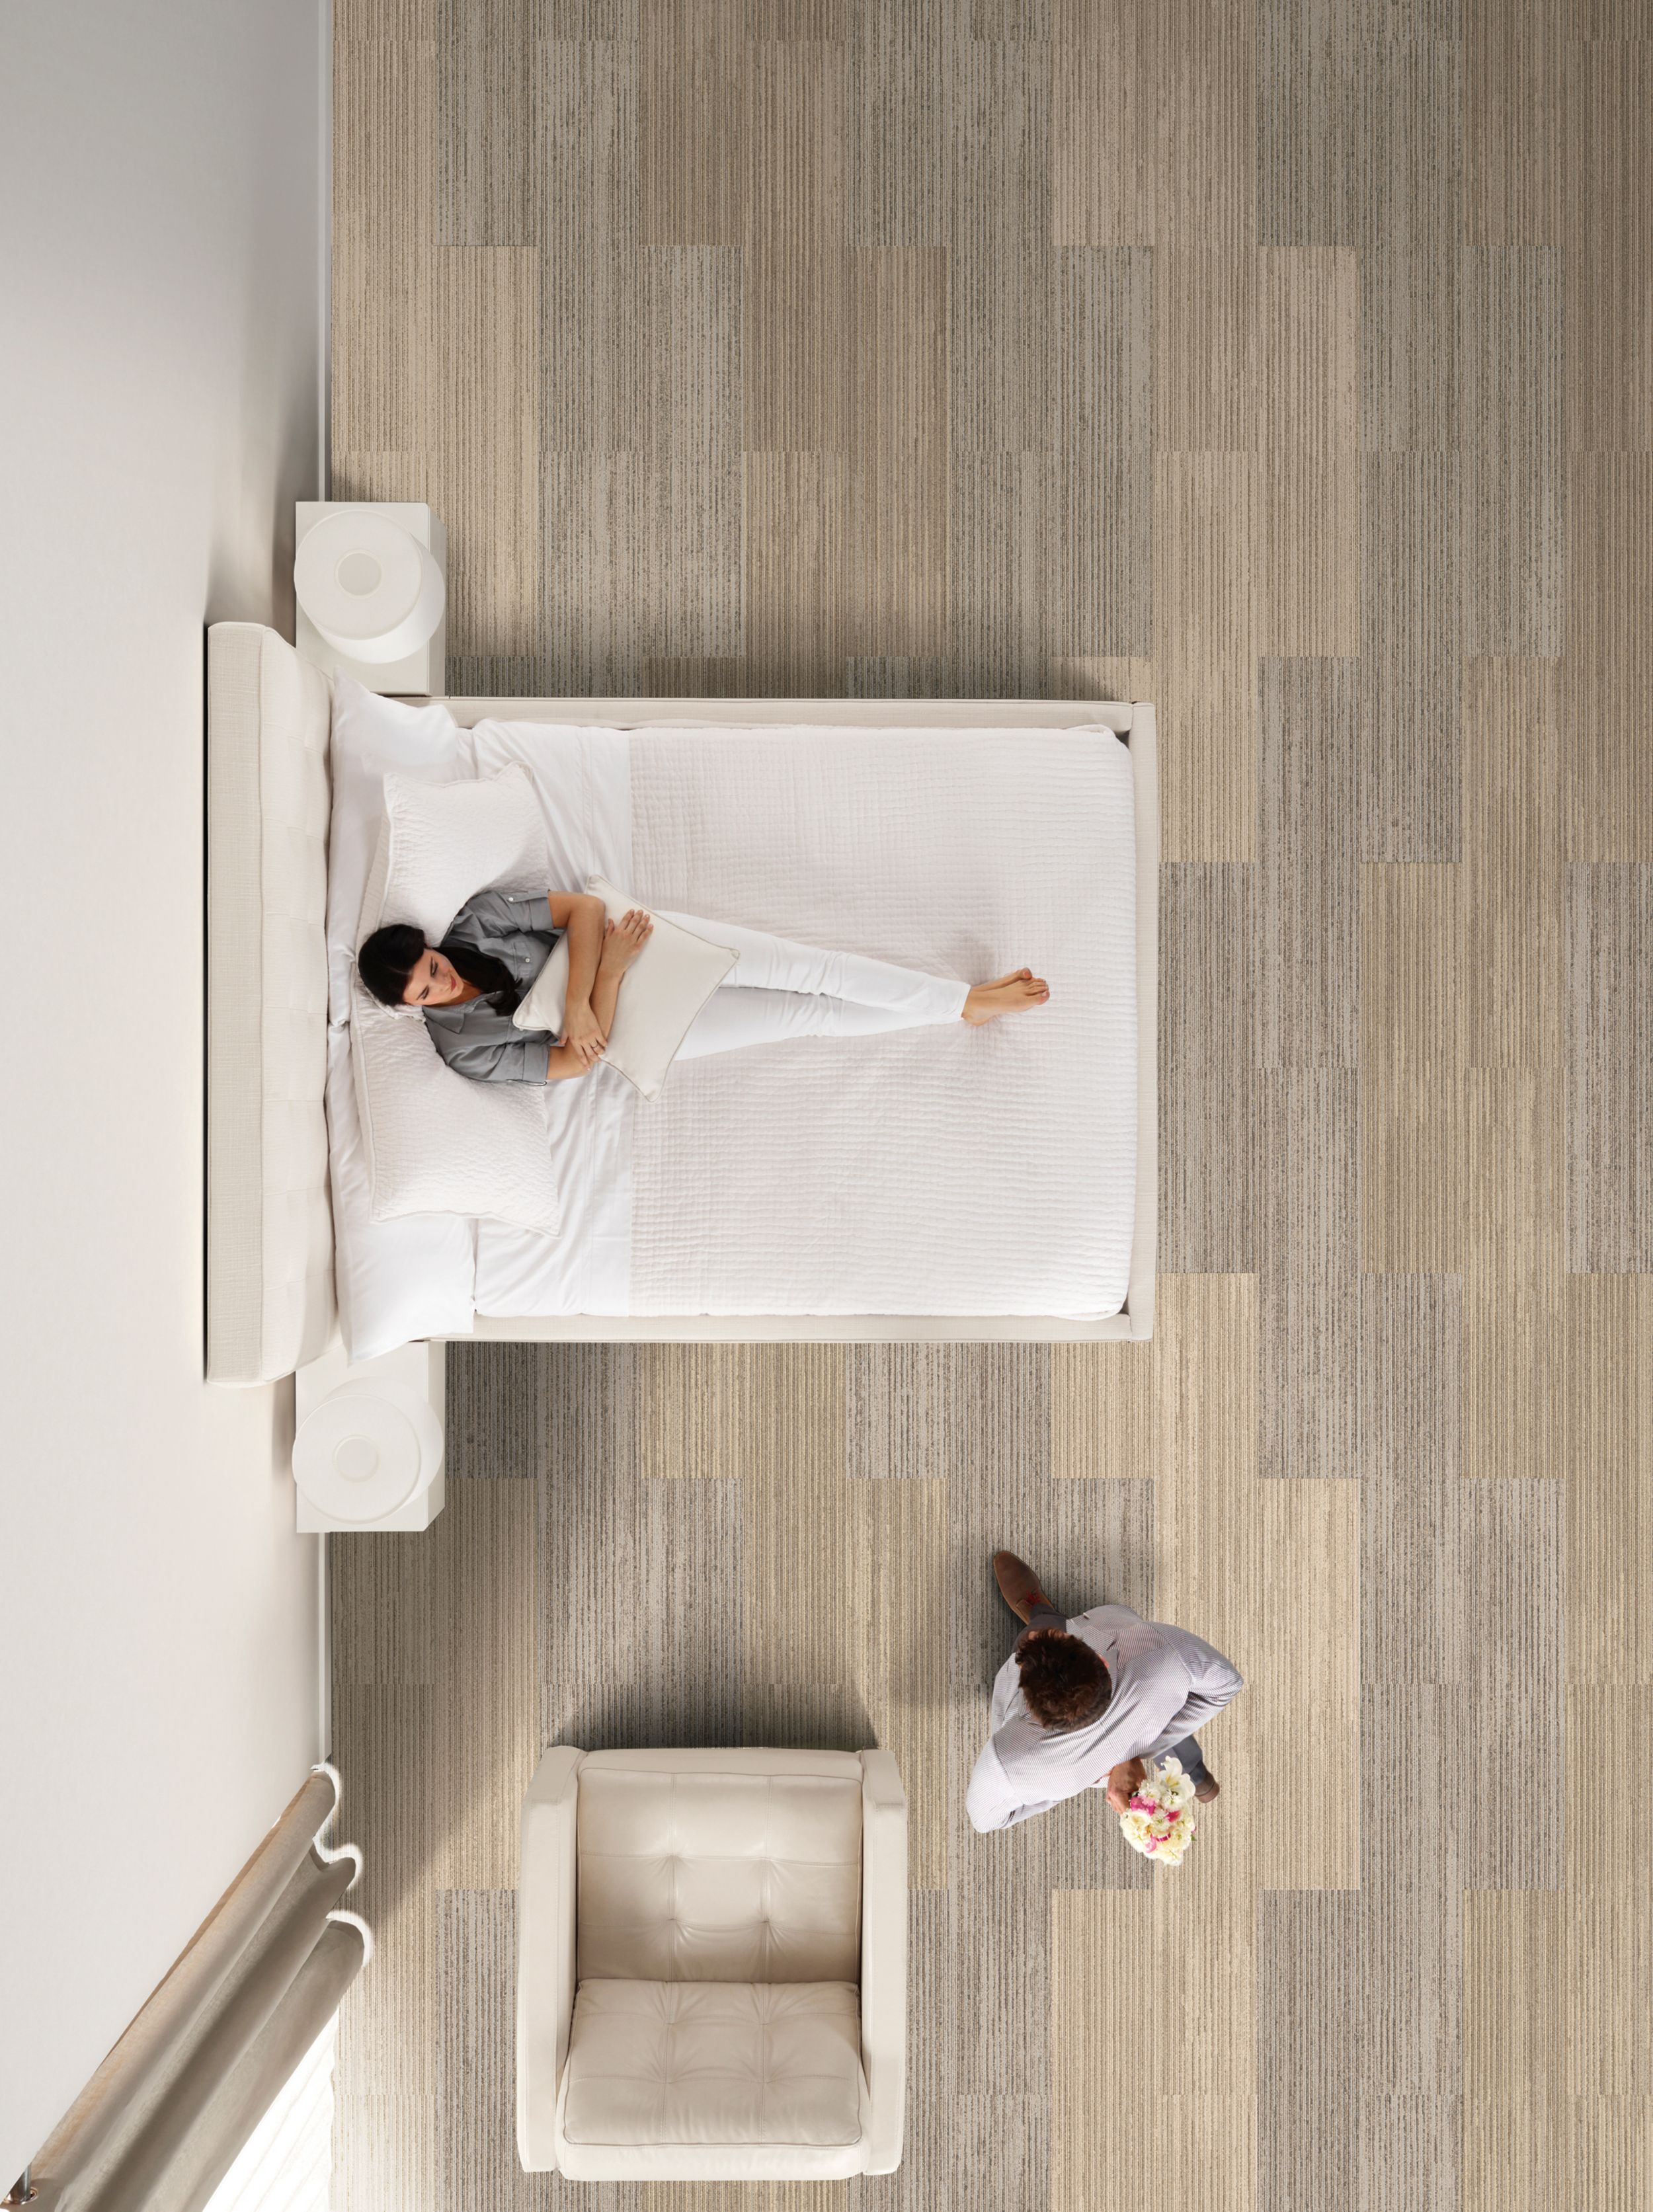 Interface SWTS 110 plank carpet tile in hotel guest room with woman and child imagen número 3